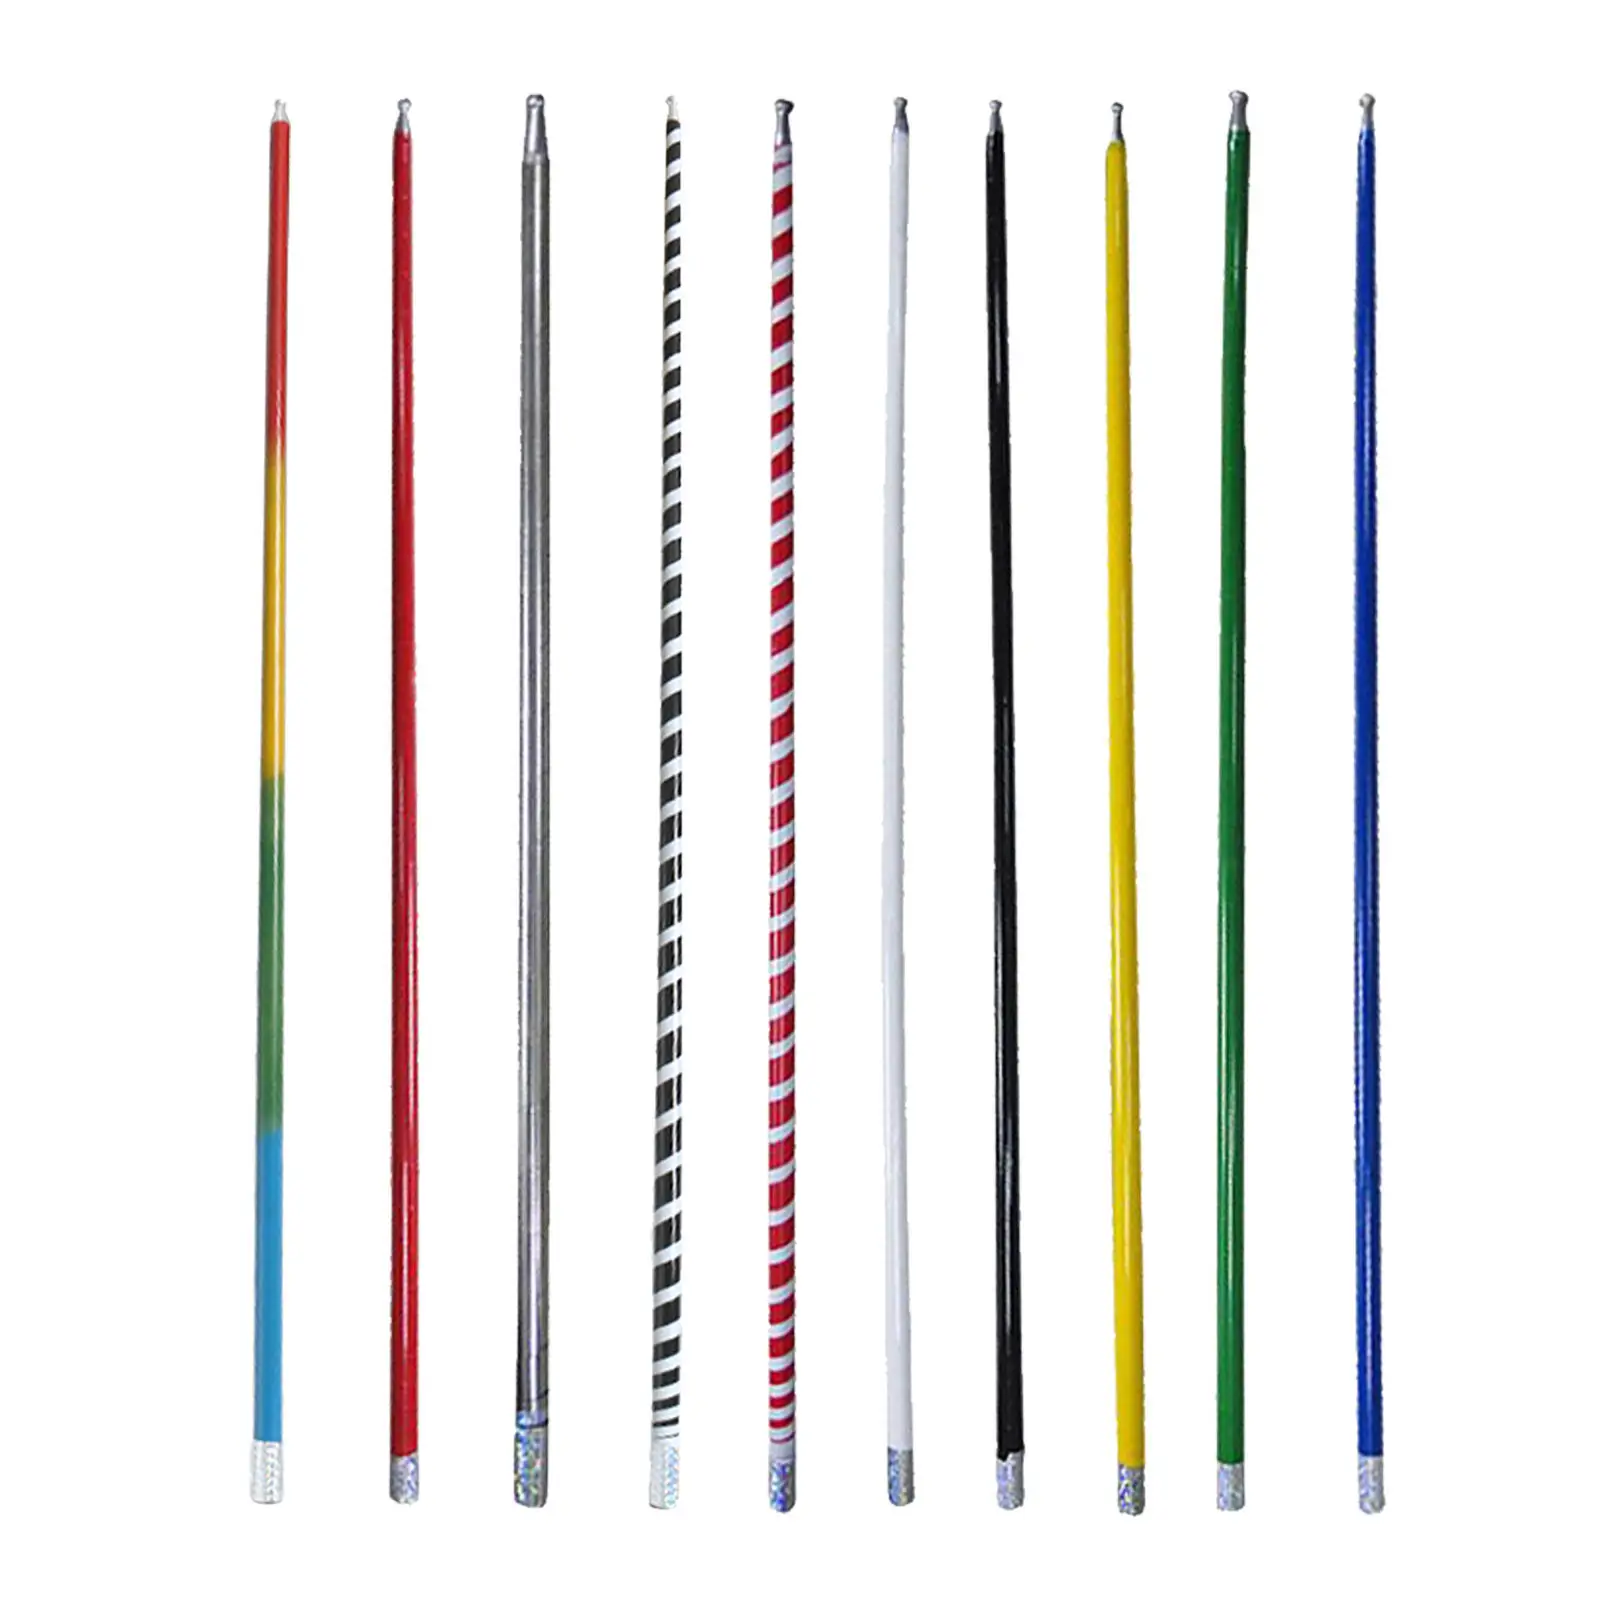 Metal Appearing Cane Magical Tricks Pocket Staff Rod Cane for Professional Magician Stage Magical Stage Costume Tool Accessories